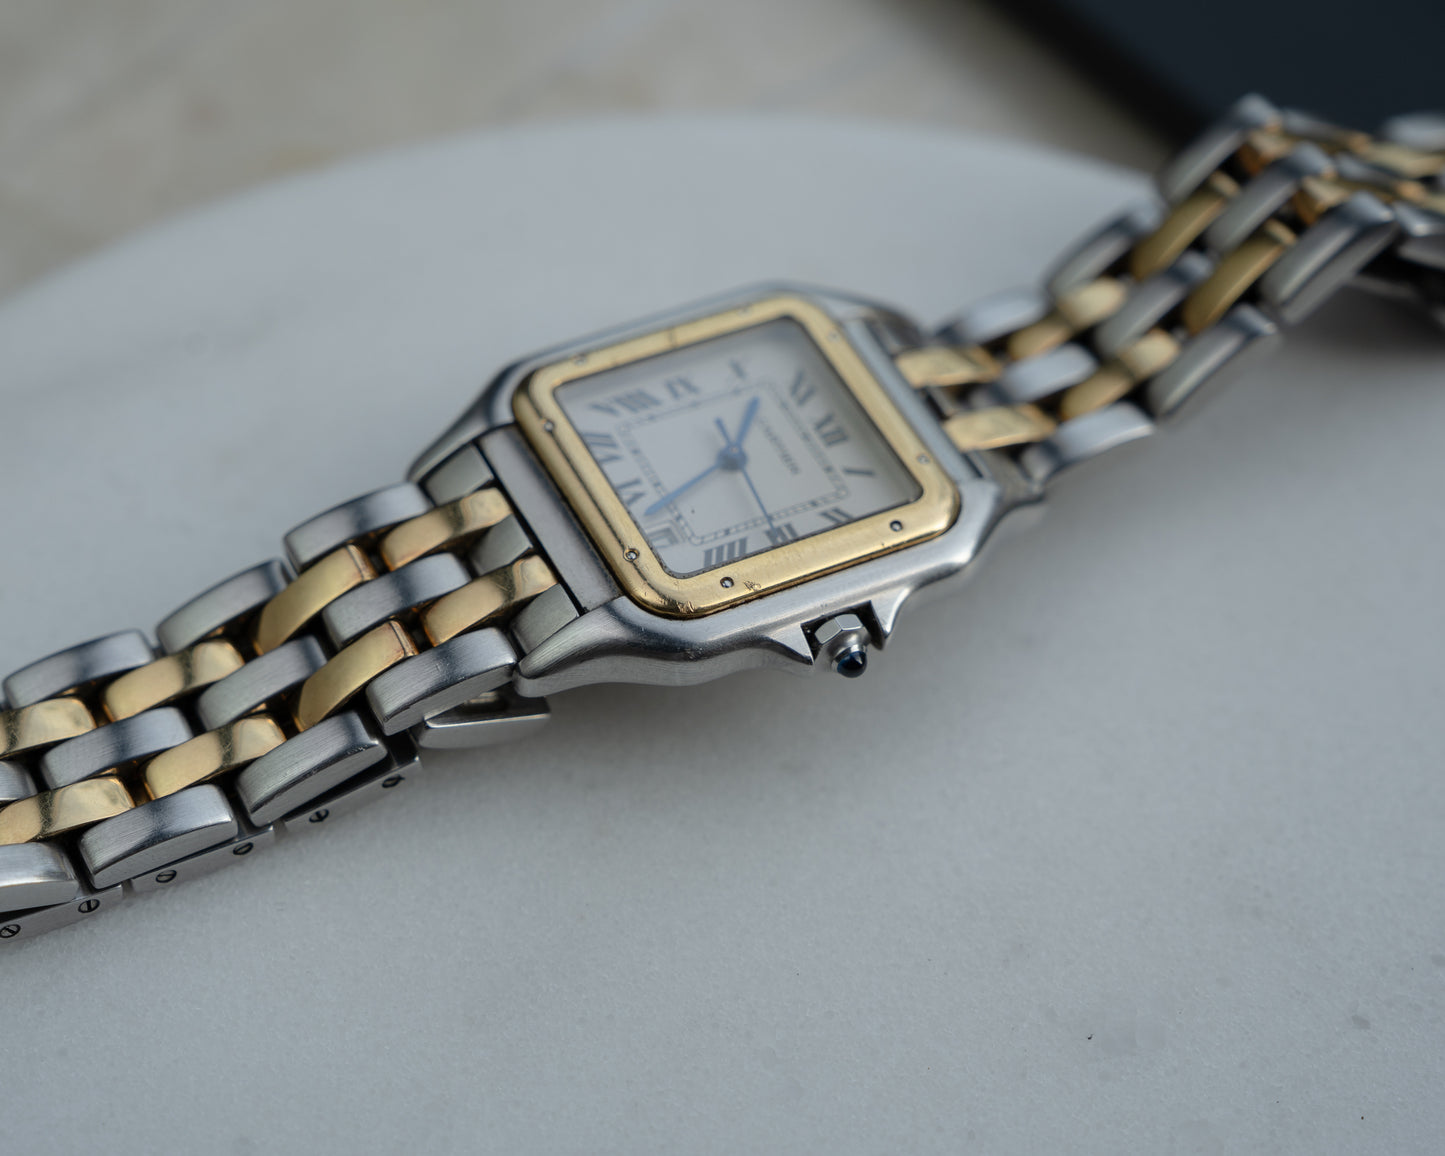 Cartier Panthere MM in steel & gold ref. 1100, box & papers